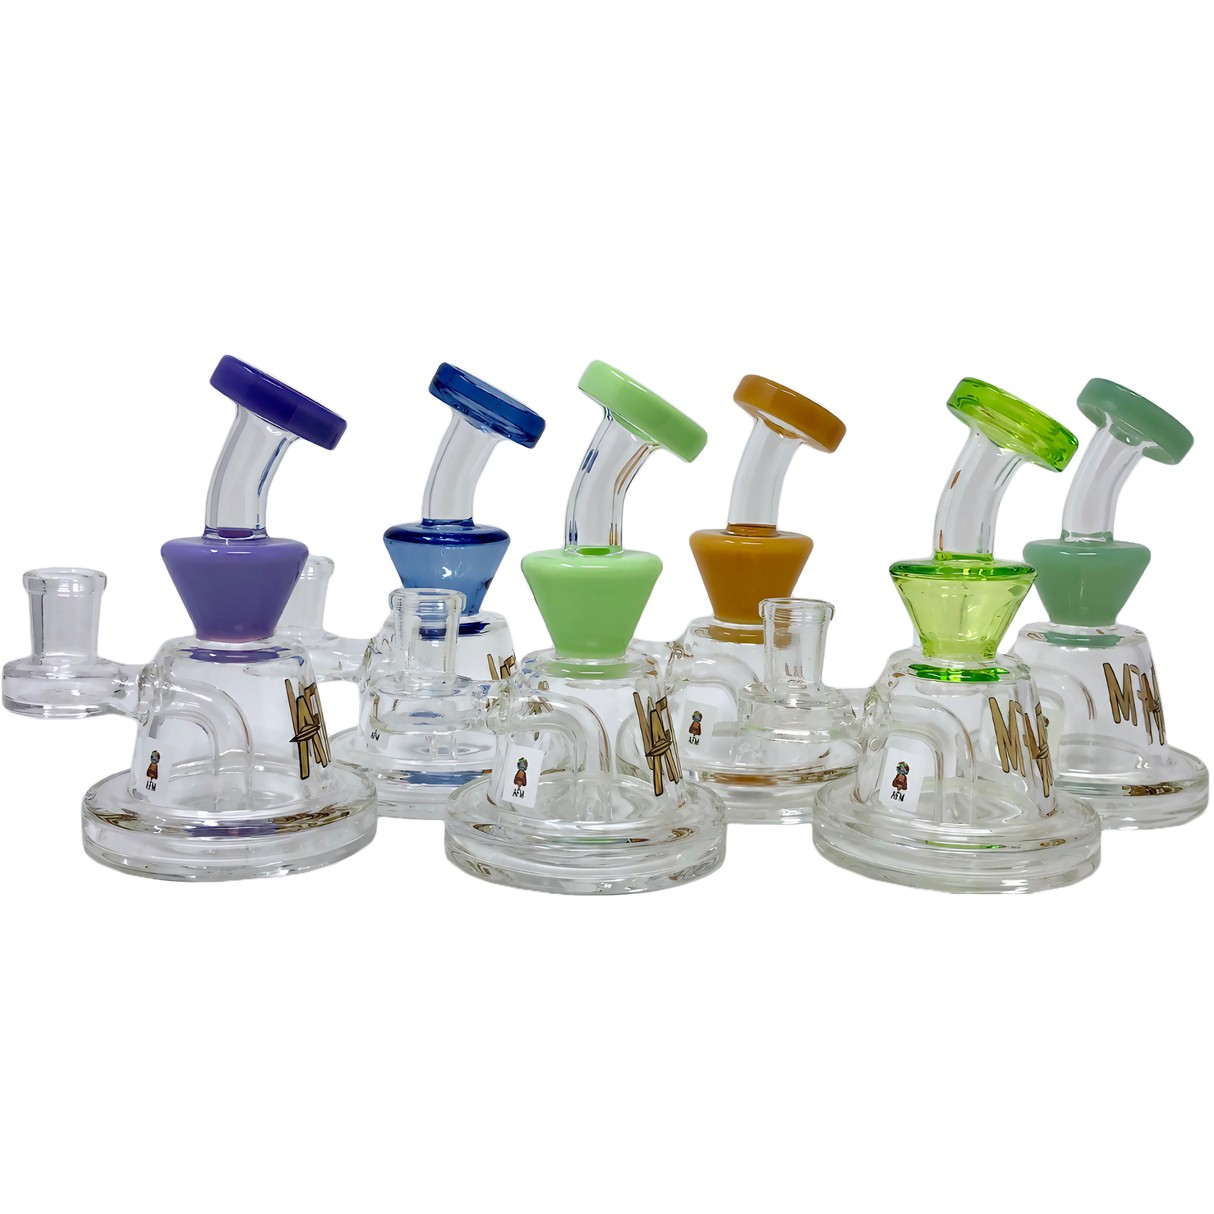 AFM Mini Rig Dab Rigs collection in various colors, compact 5.5" design with glass on glass joint